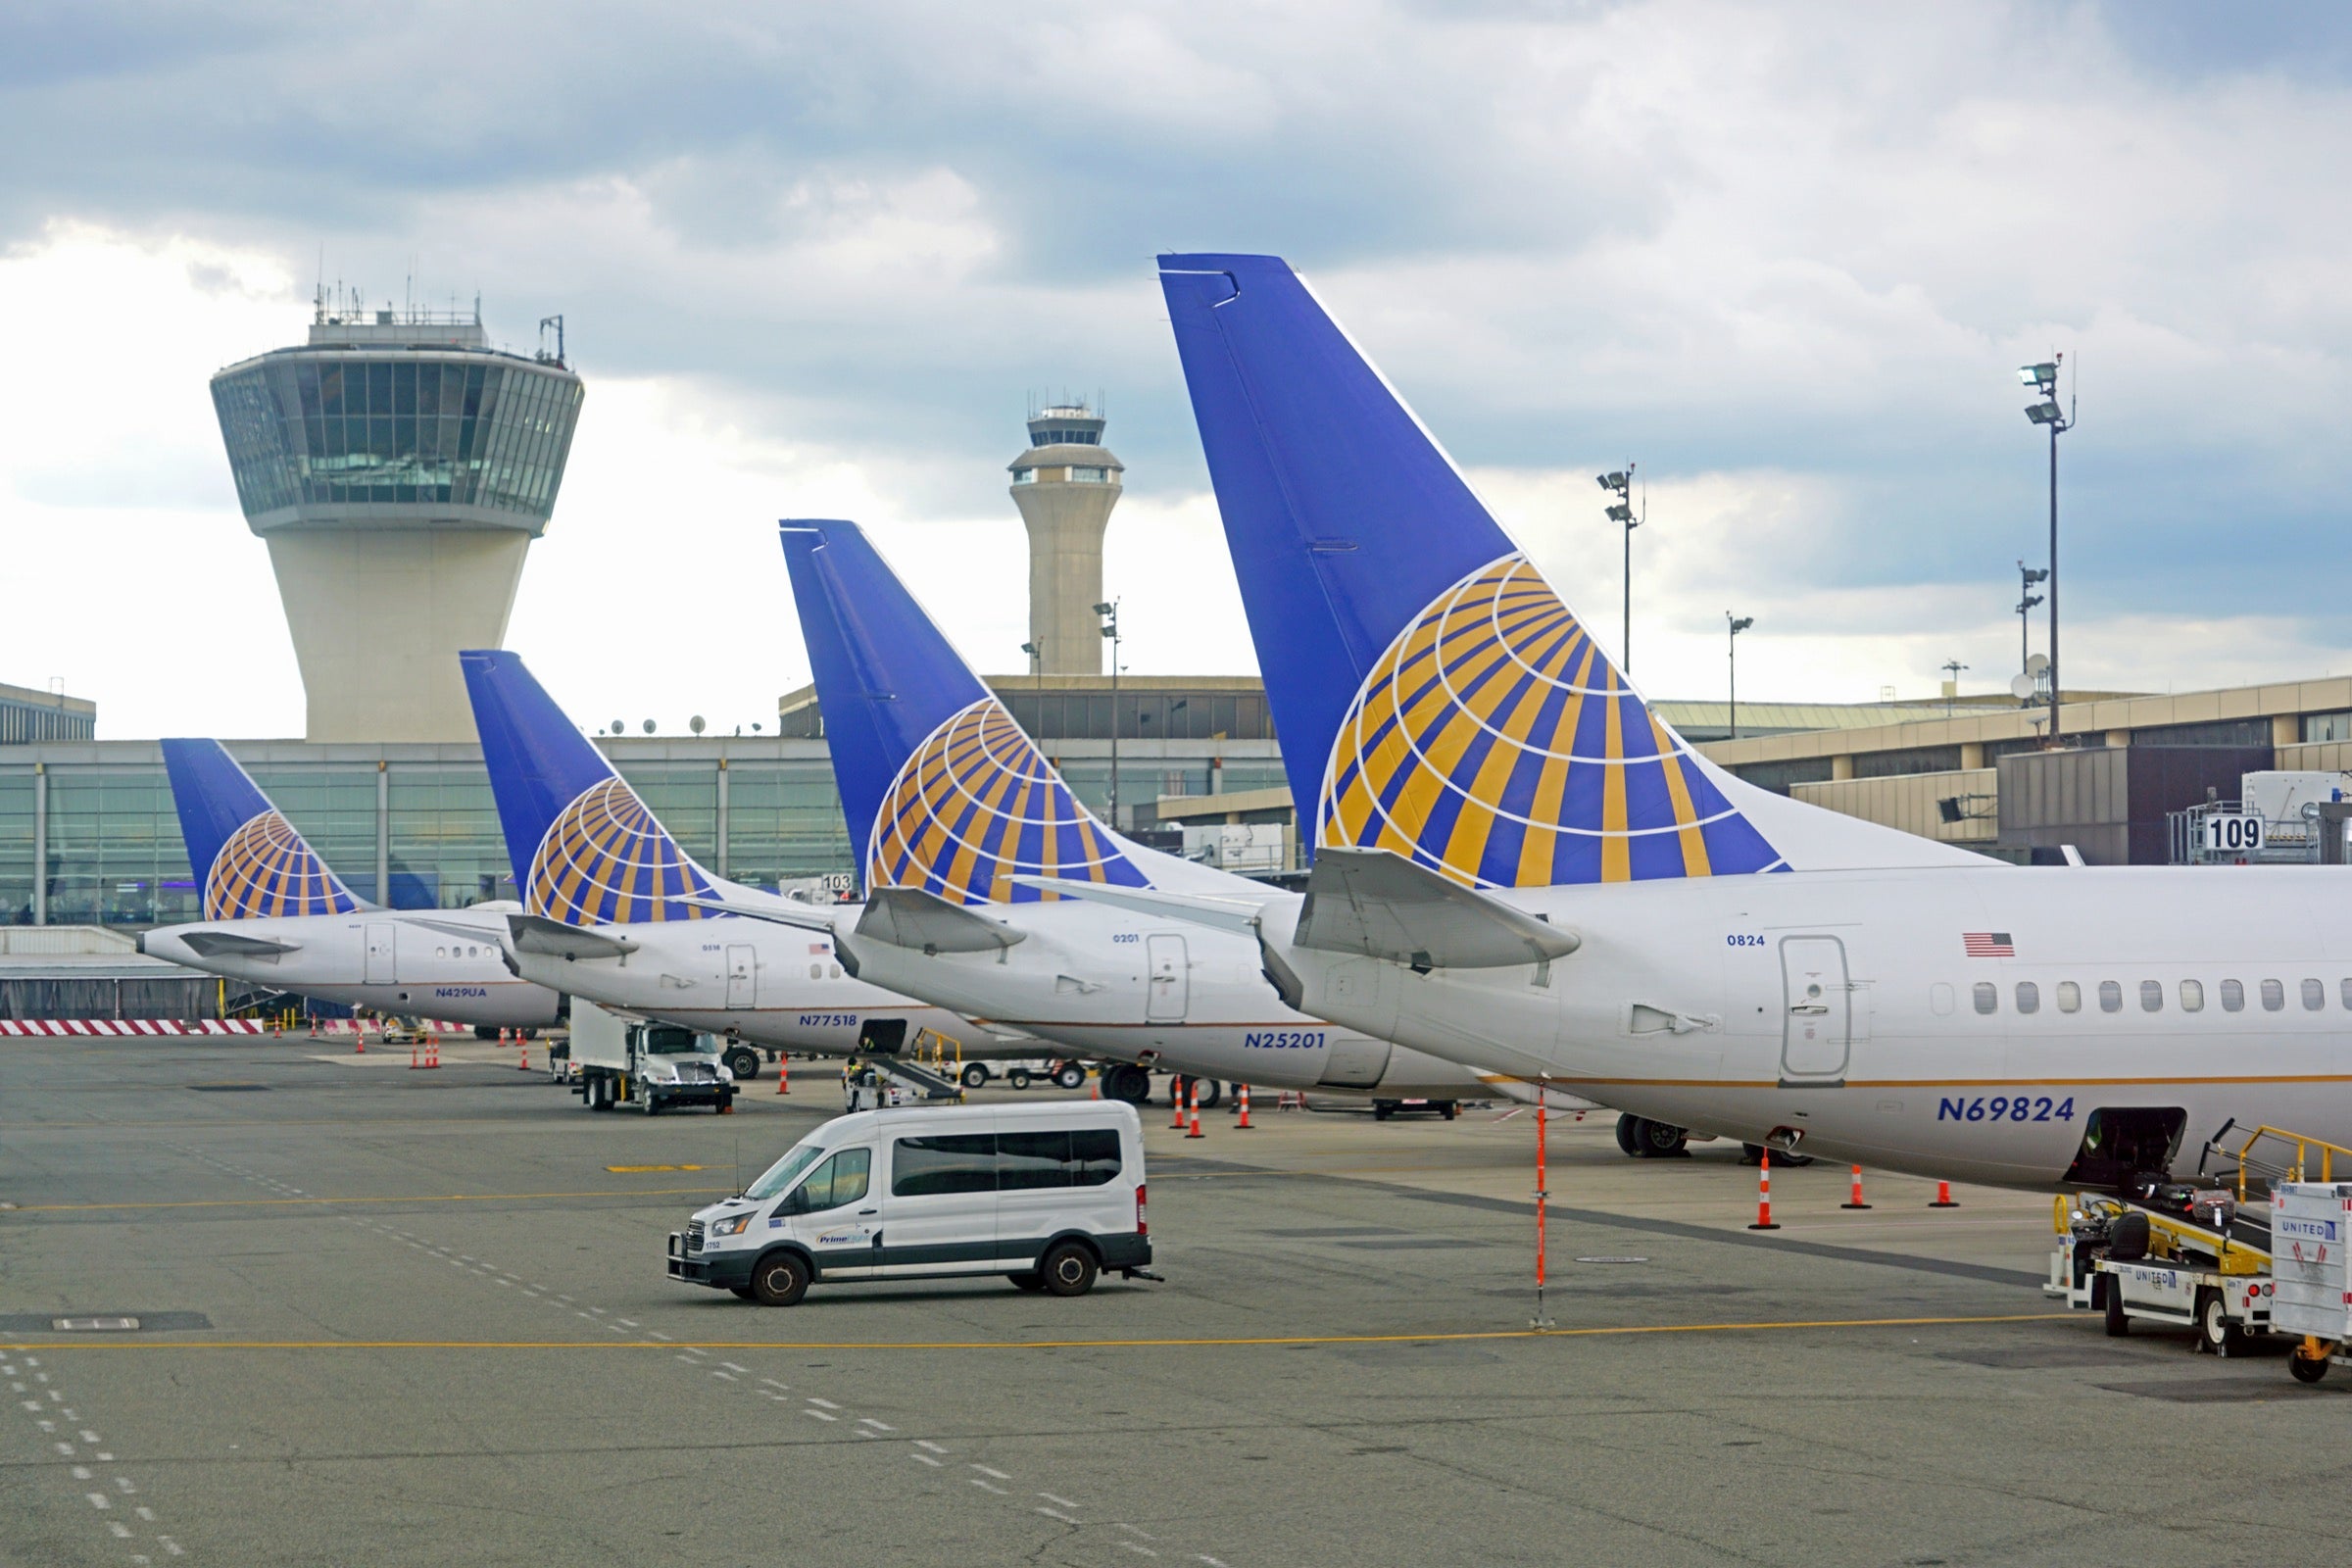 United planes at the gate in Newark airport